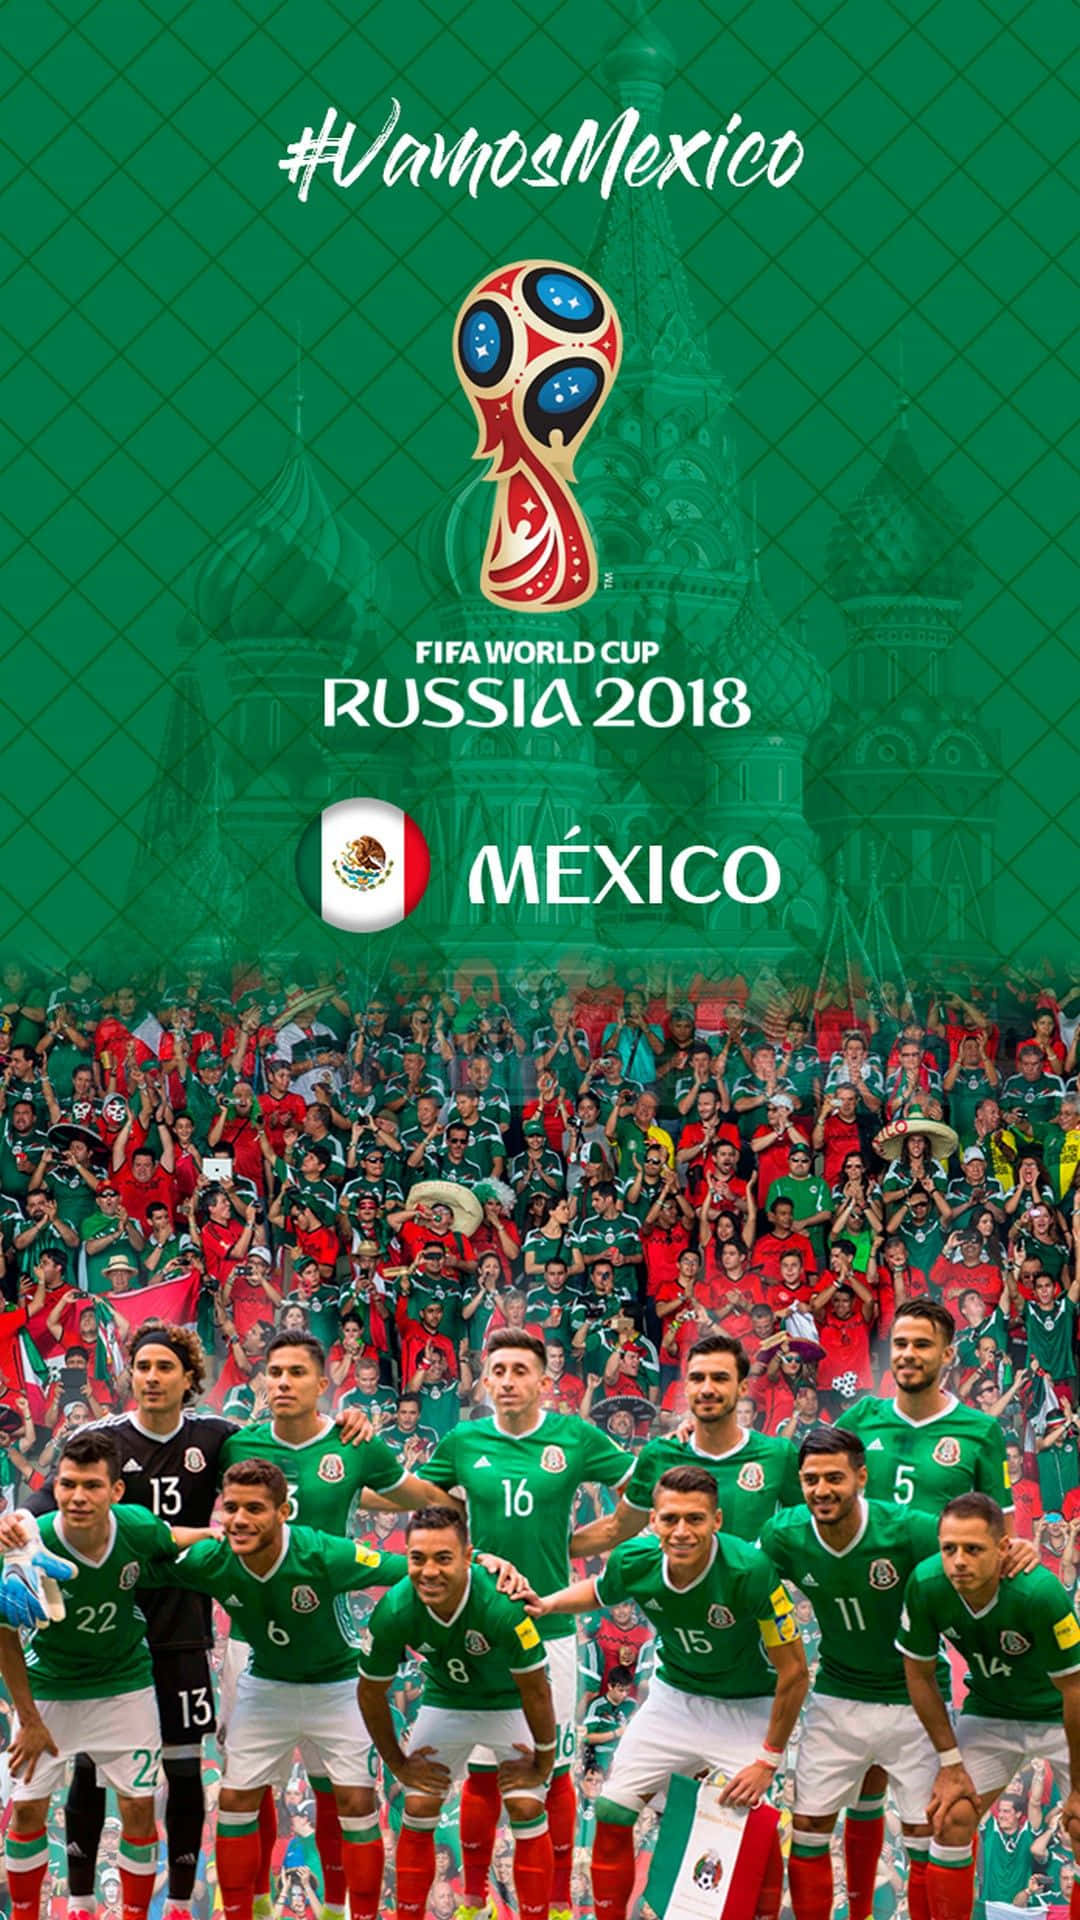 Mexico Soccer Team on the Pitch Wallpaper